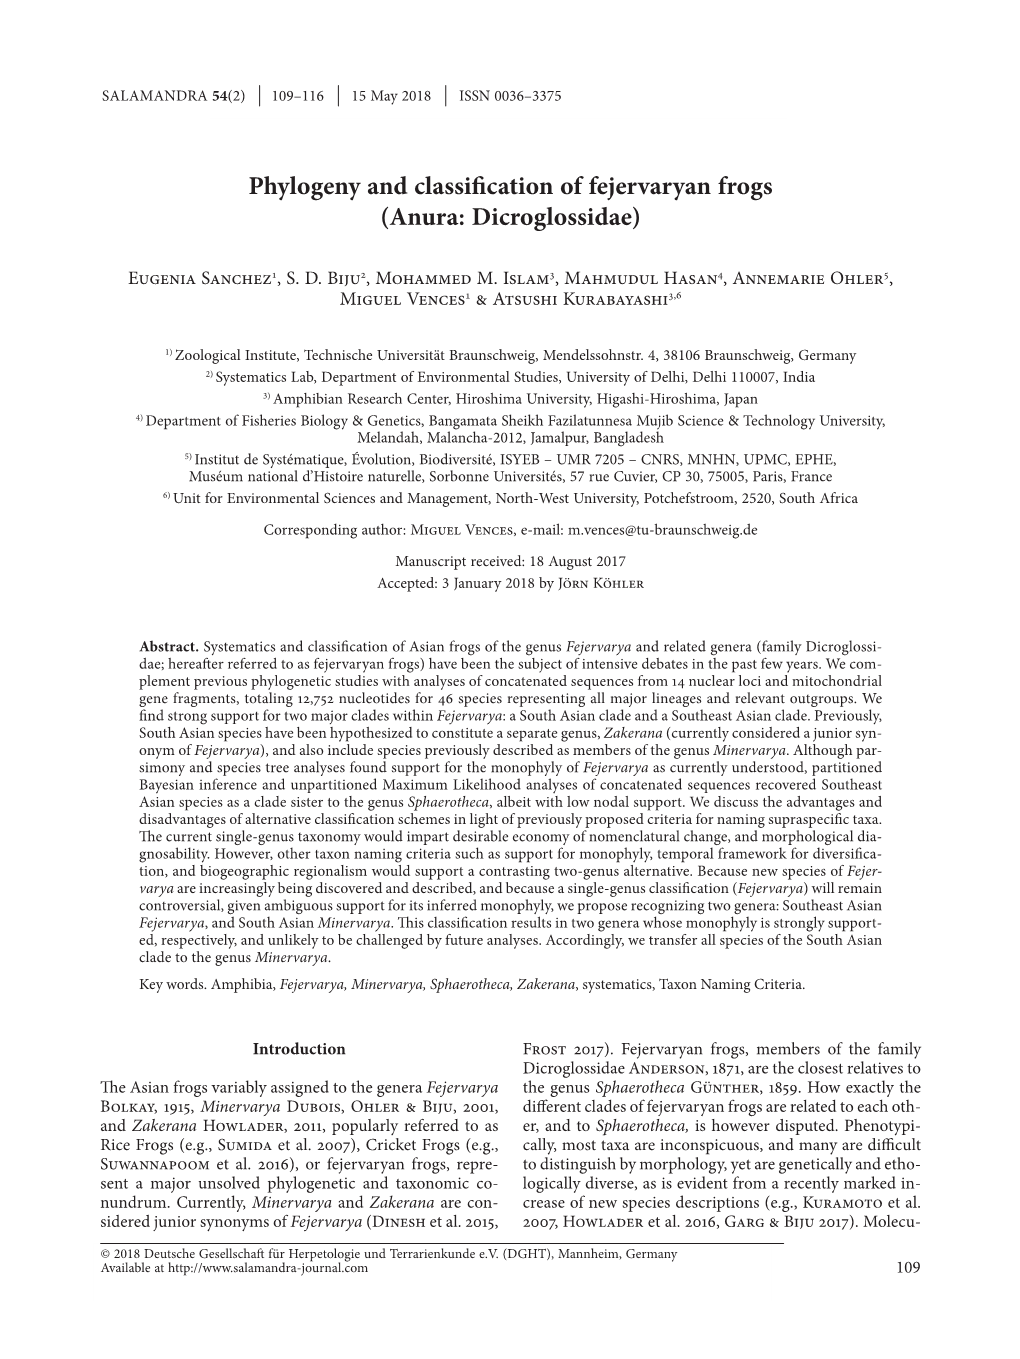 Phylogeny and Classification of Fejervaryan Frogs (Anura: Dicroglossidae)